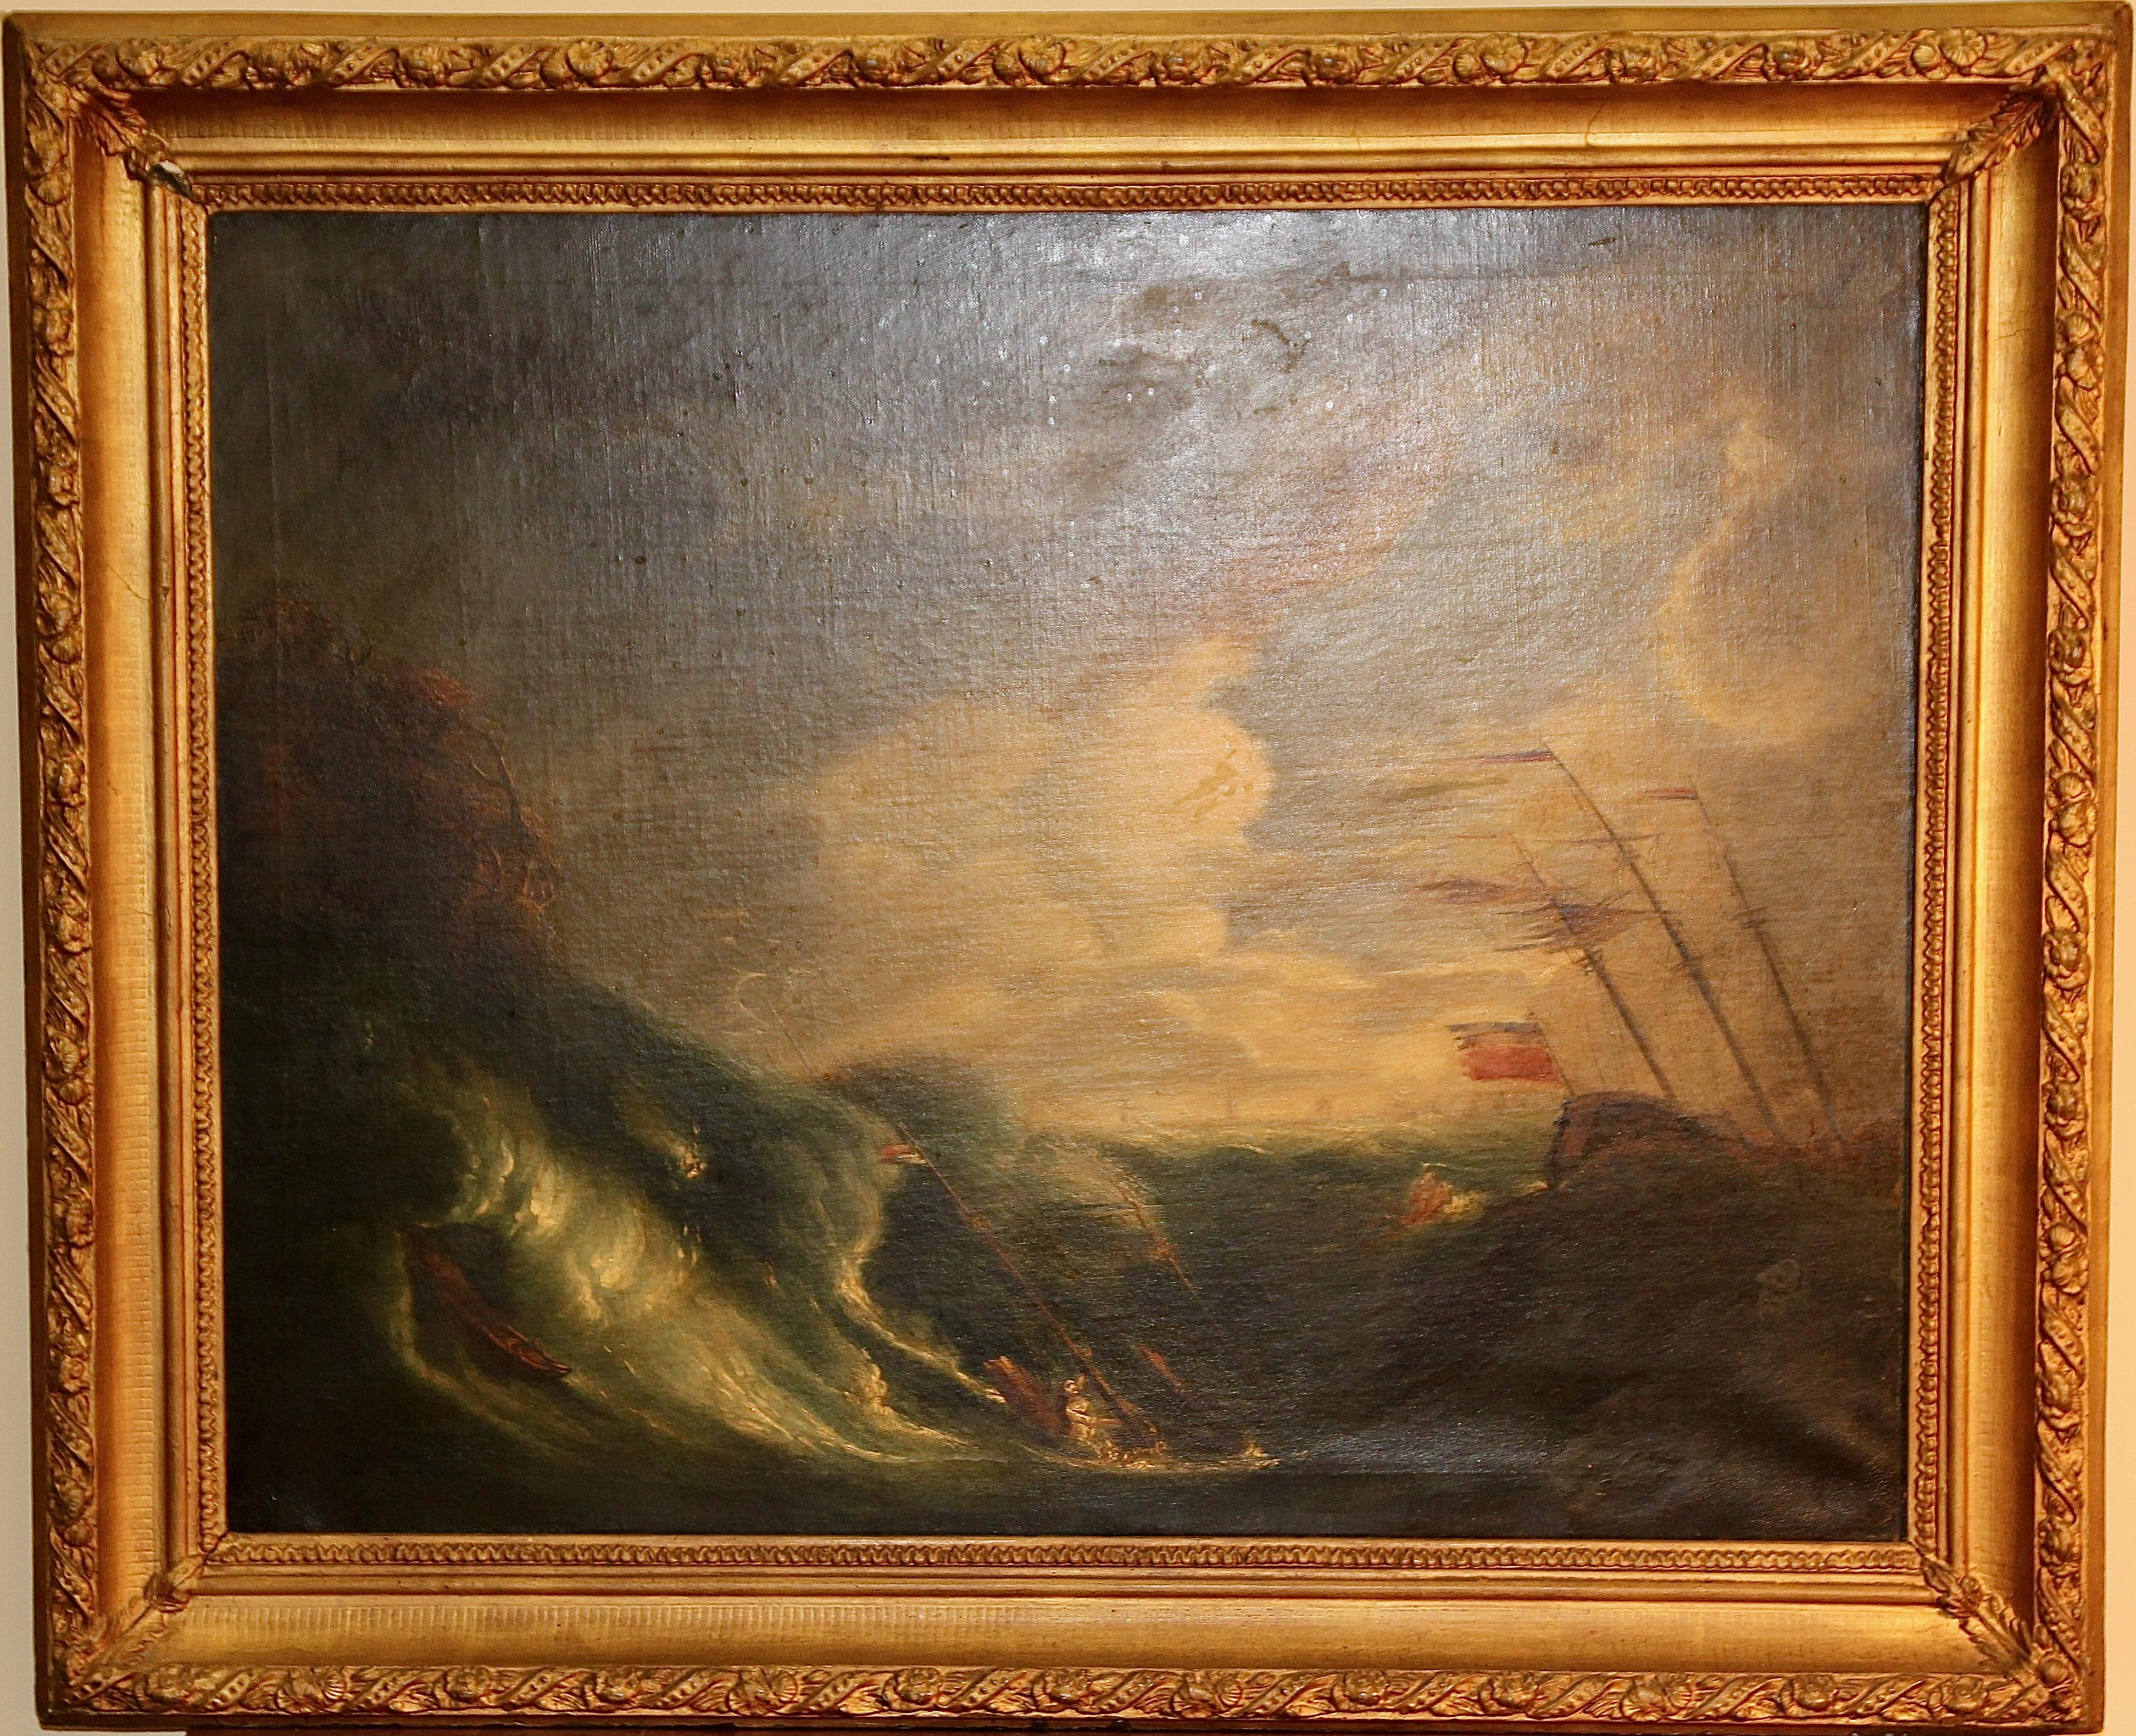 Antique Painting, Oil on canvas. Capsized Ship on a Stormy Sea.